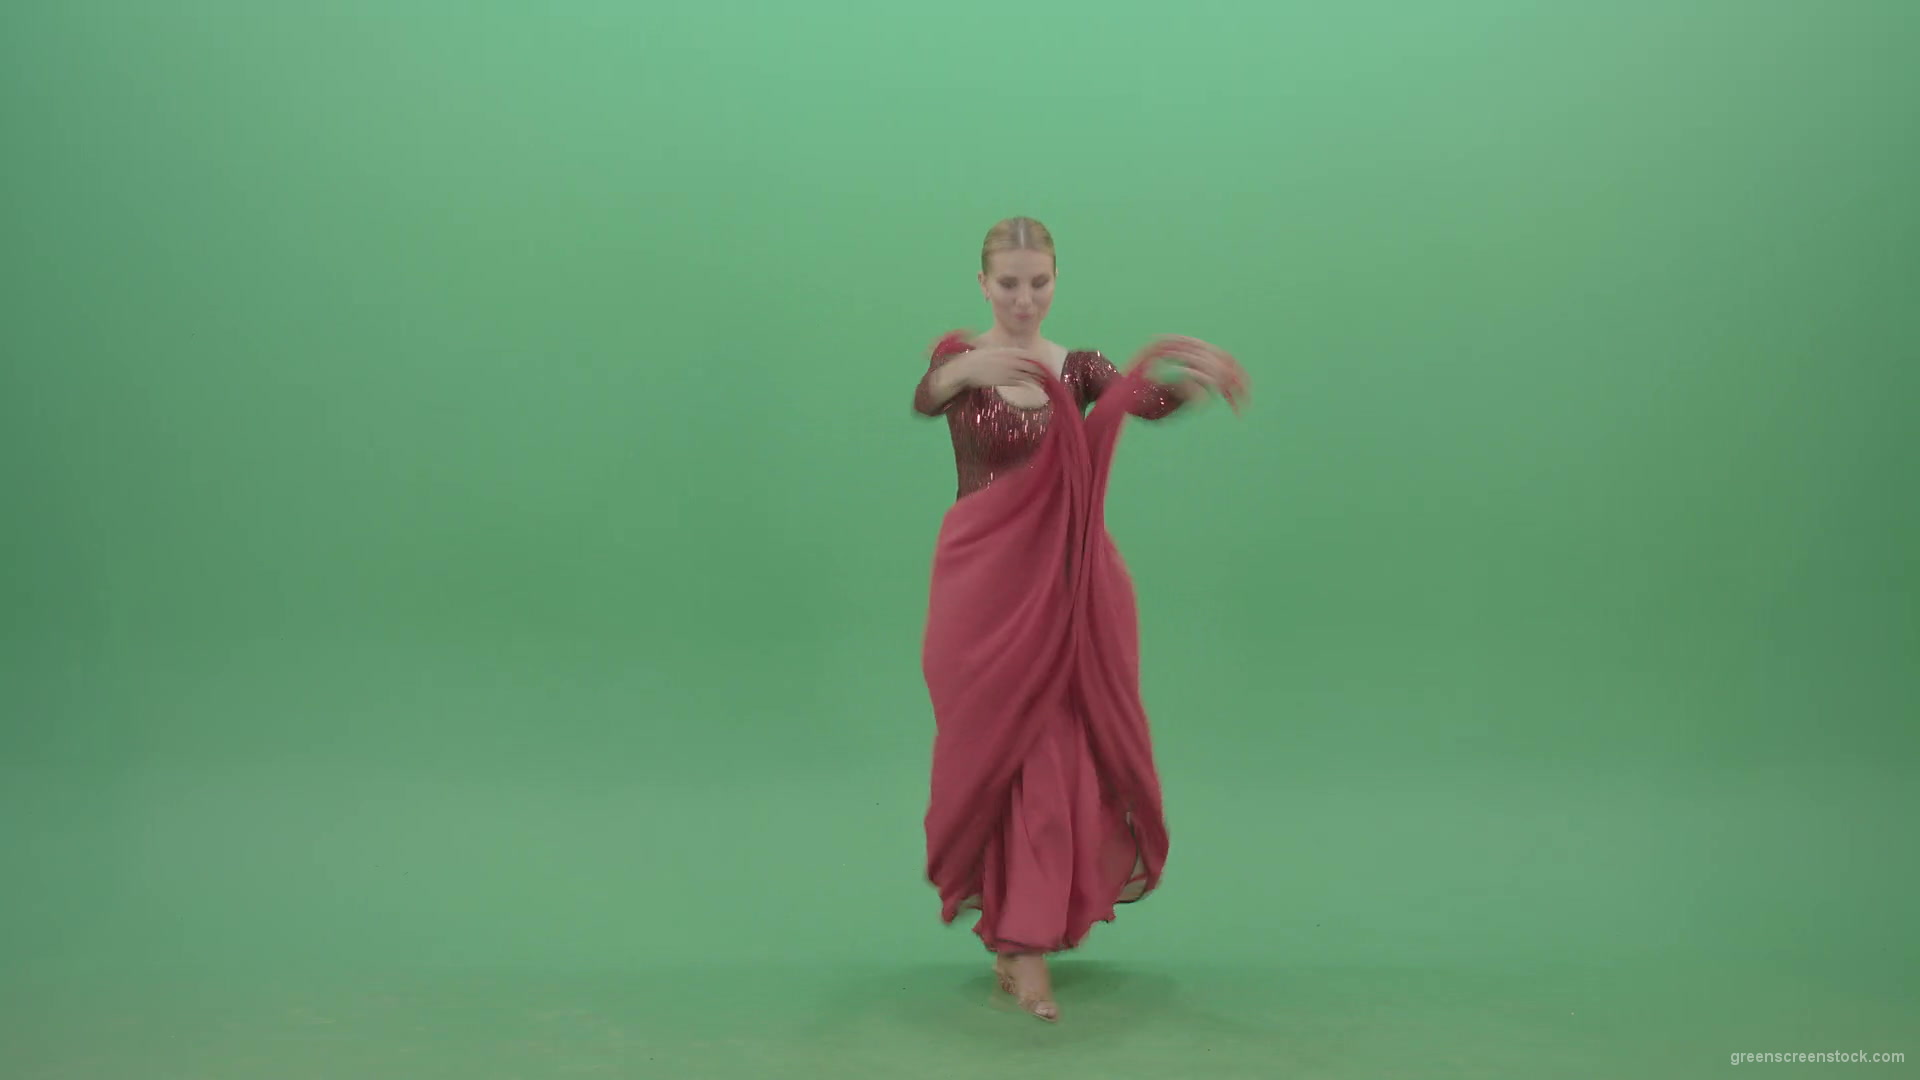 Elegant-woman-in-red-ballroom-dress-spinning-and-clapping-in-hands-isolated-on-green-screen-4K-Video-Footage-1920_002 Green Screen Stock